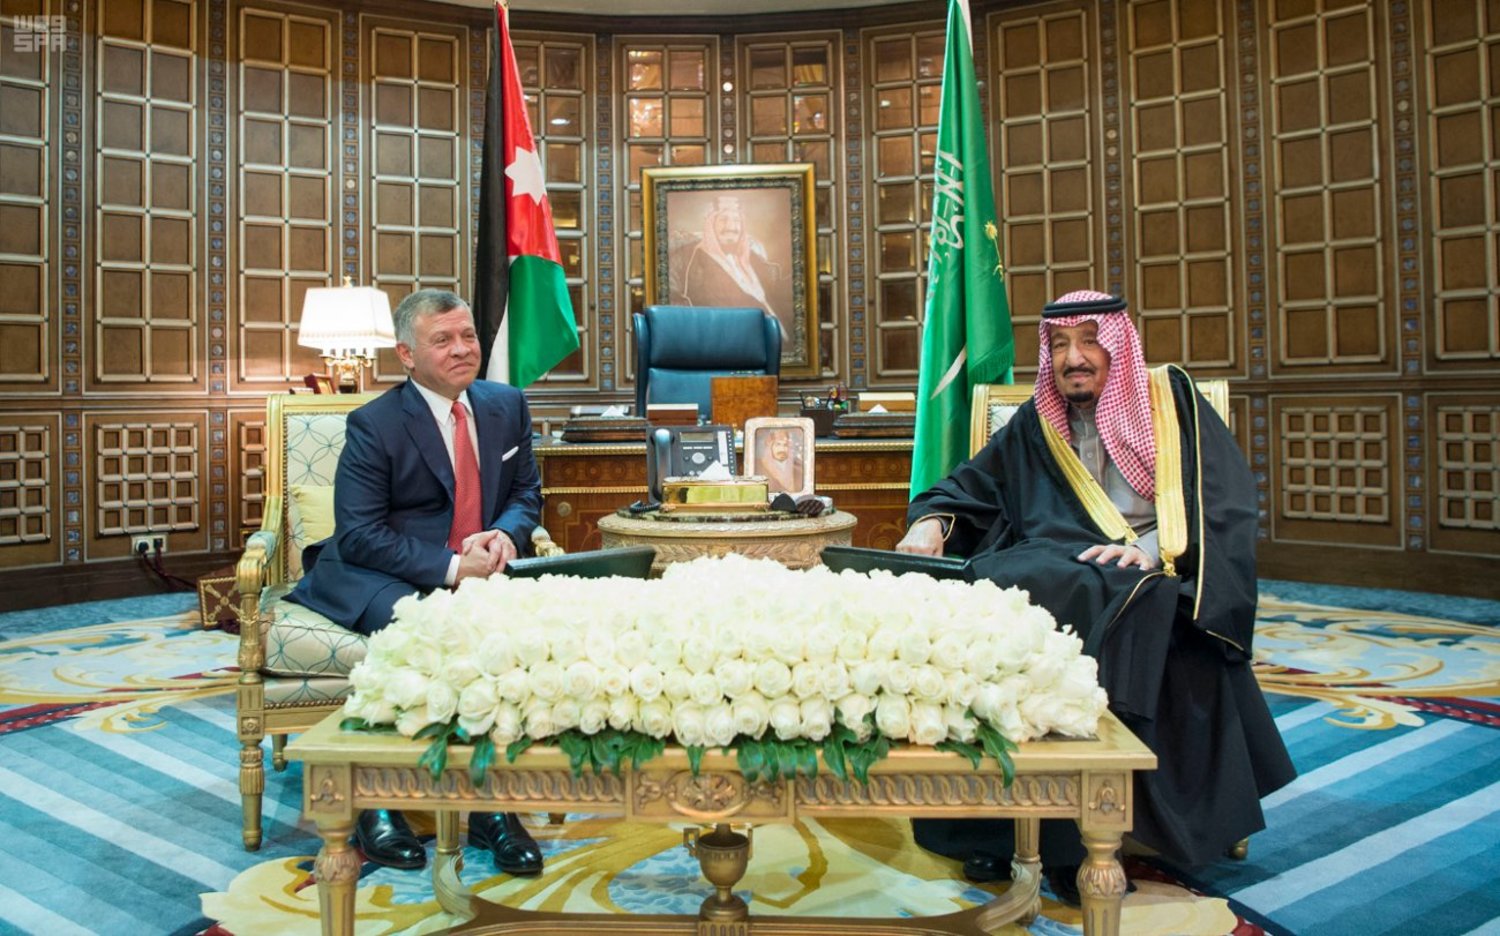 Custodian of the Two Holy Mosques and King of Jordan hold session of official talks (SPA)